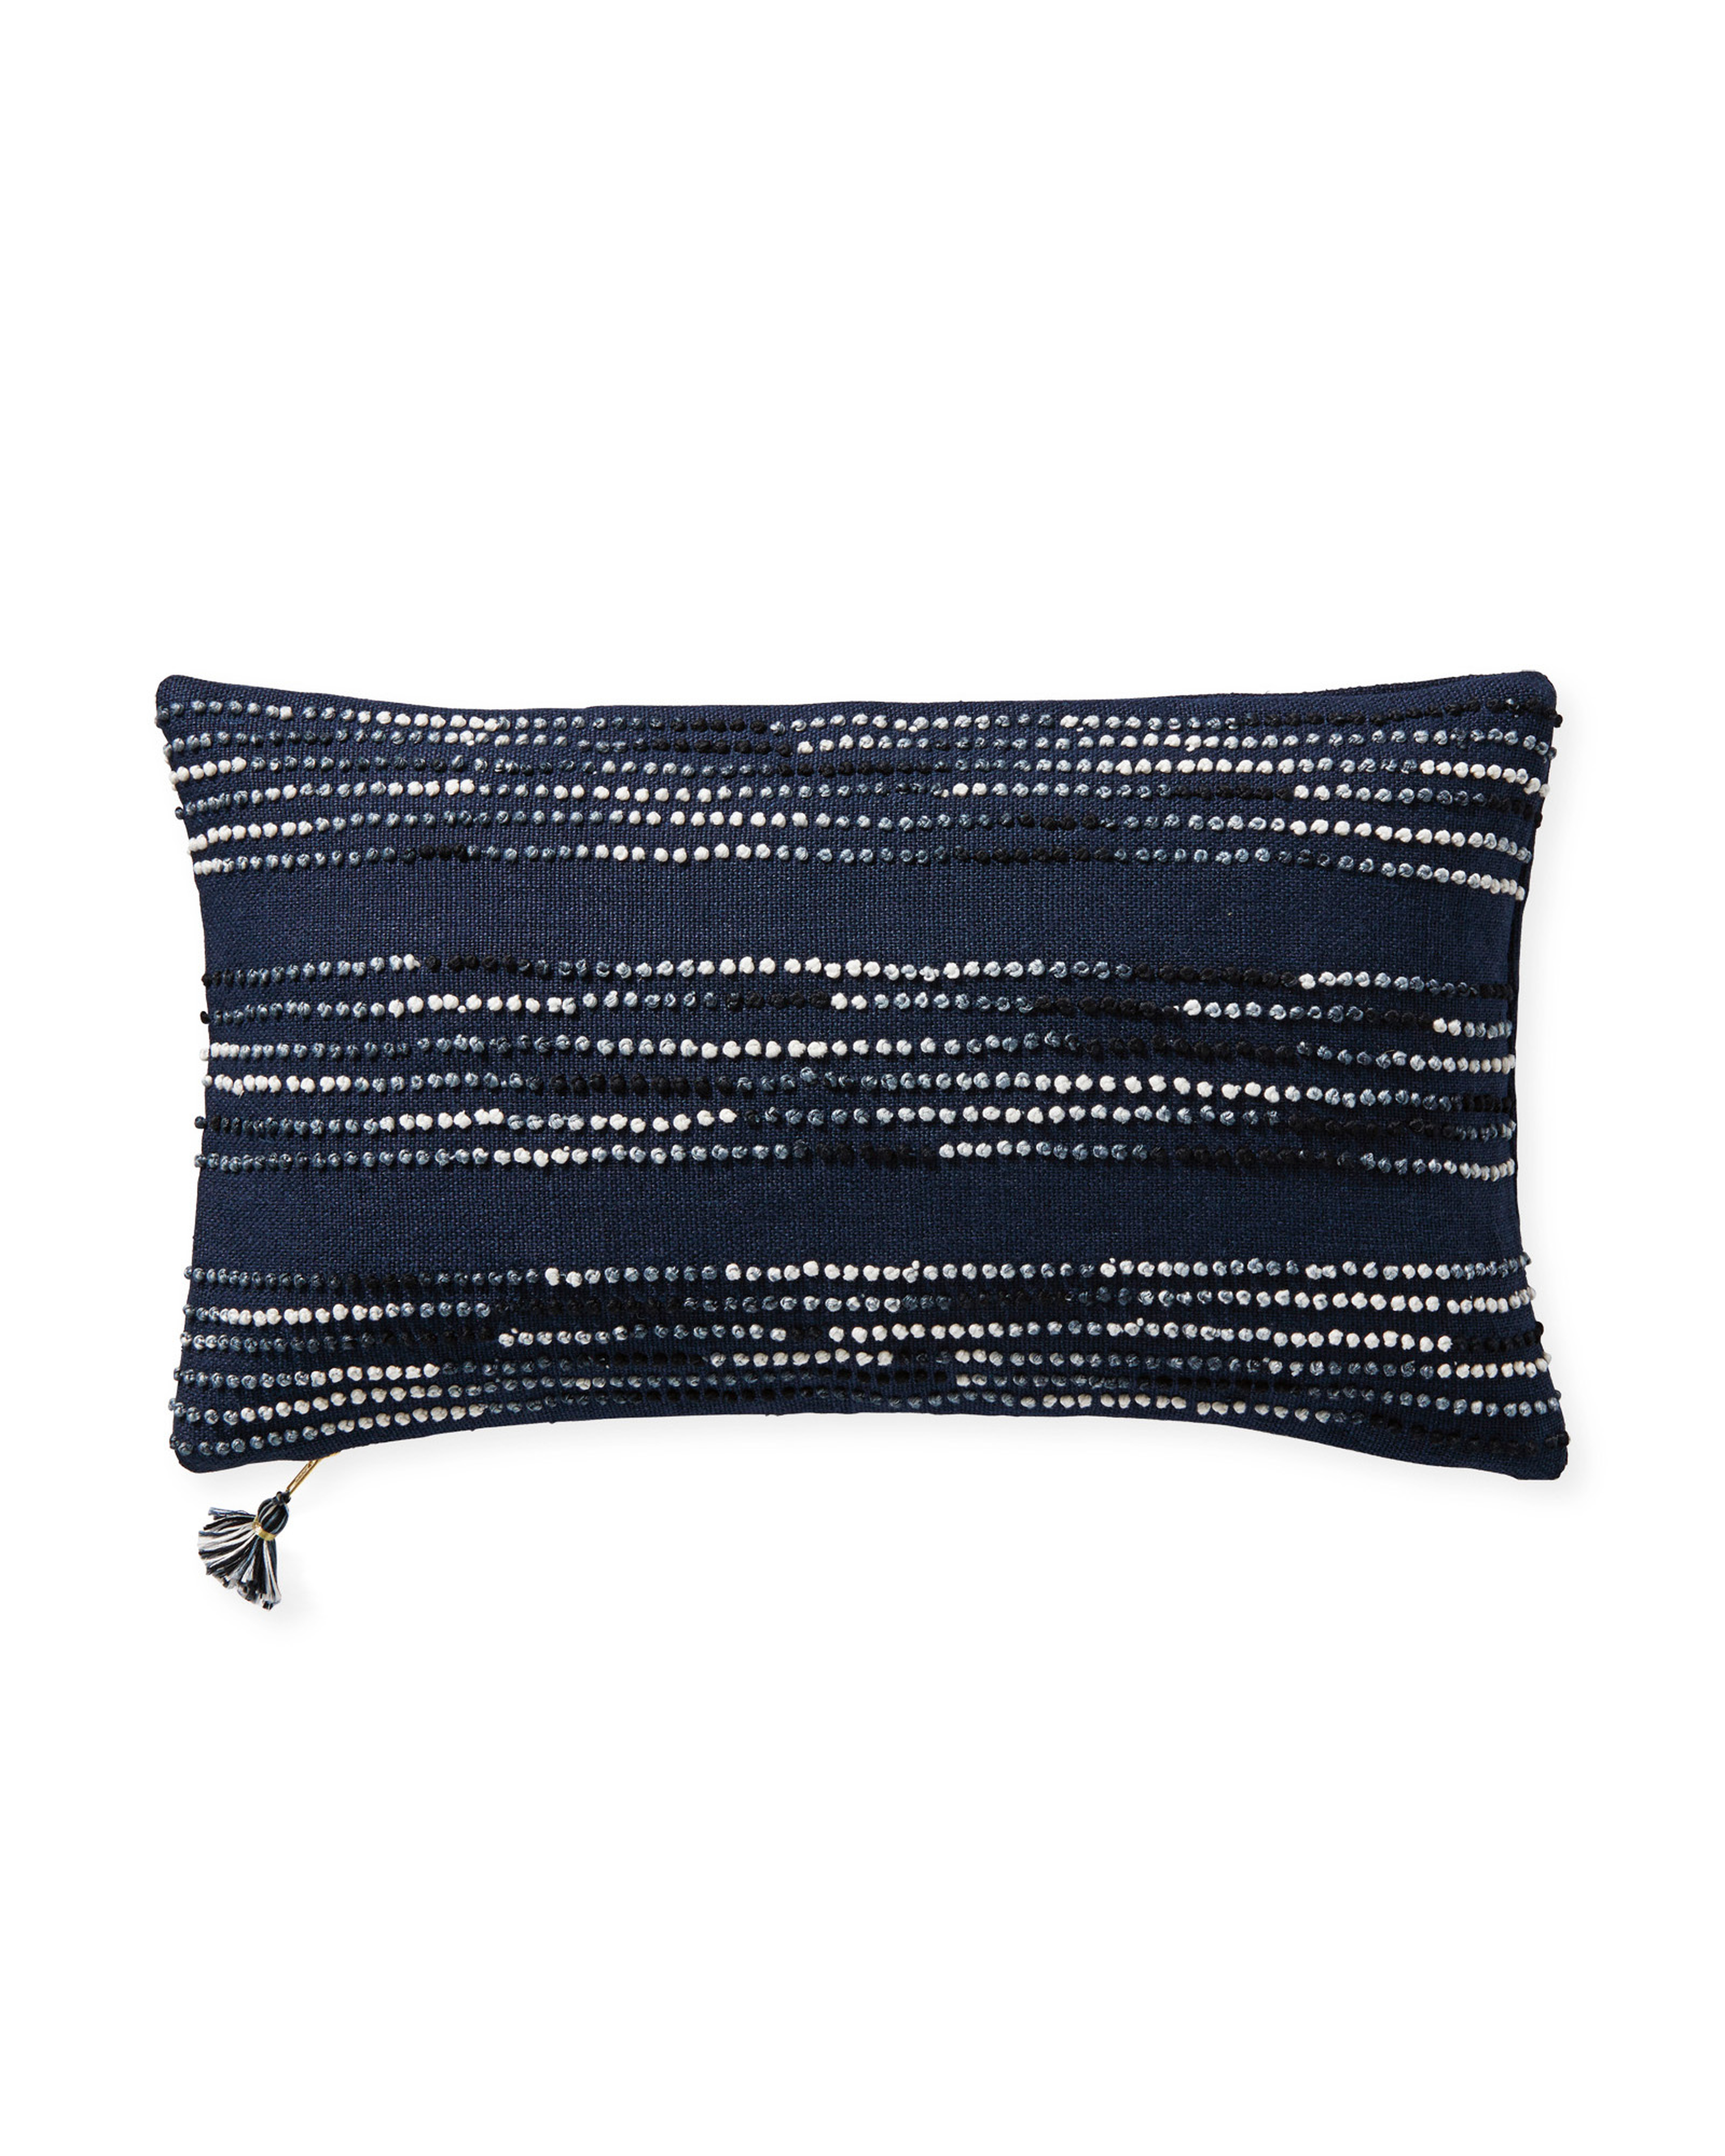 Pryce 12" x 21" Pillow Cover - Navy - Insert sold separately - Serena and Lily